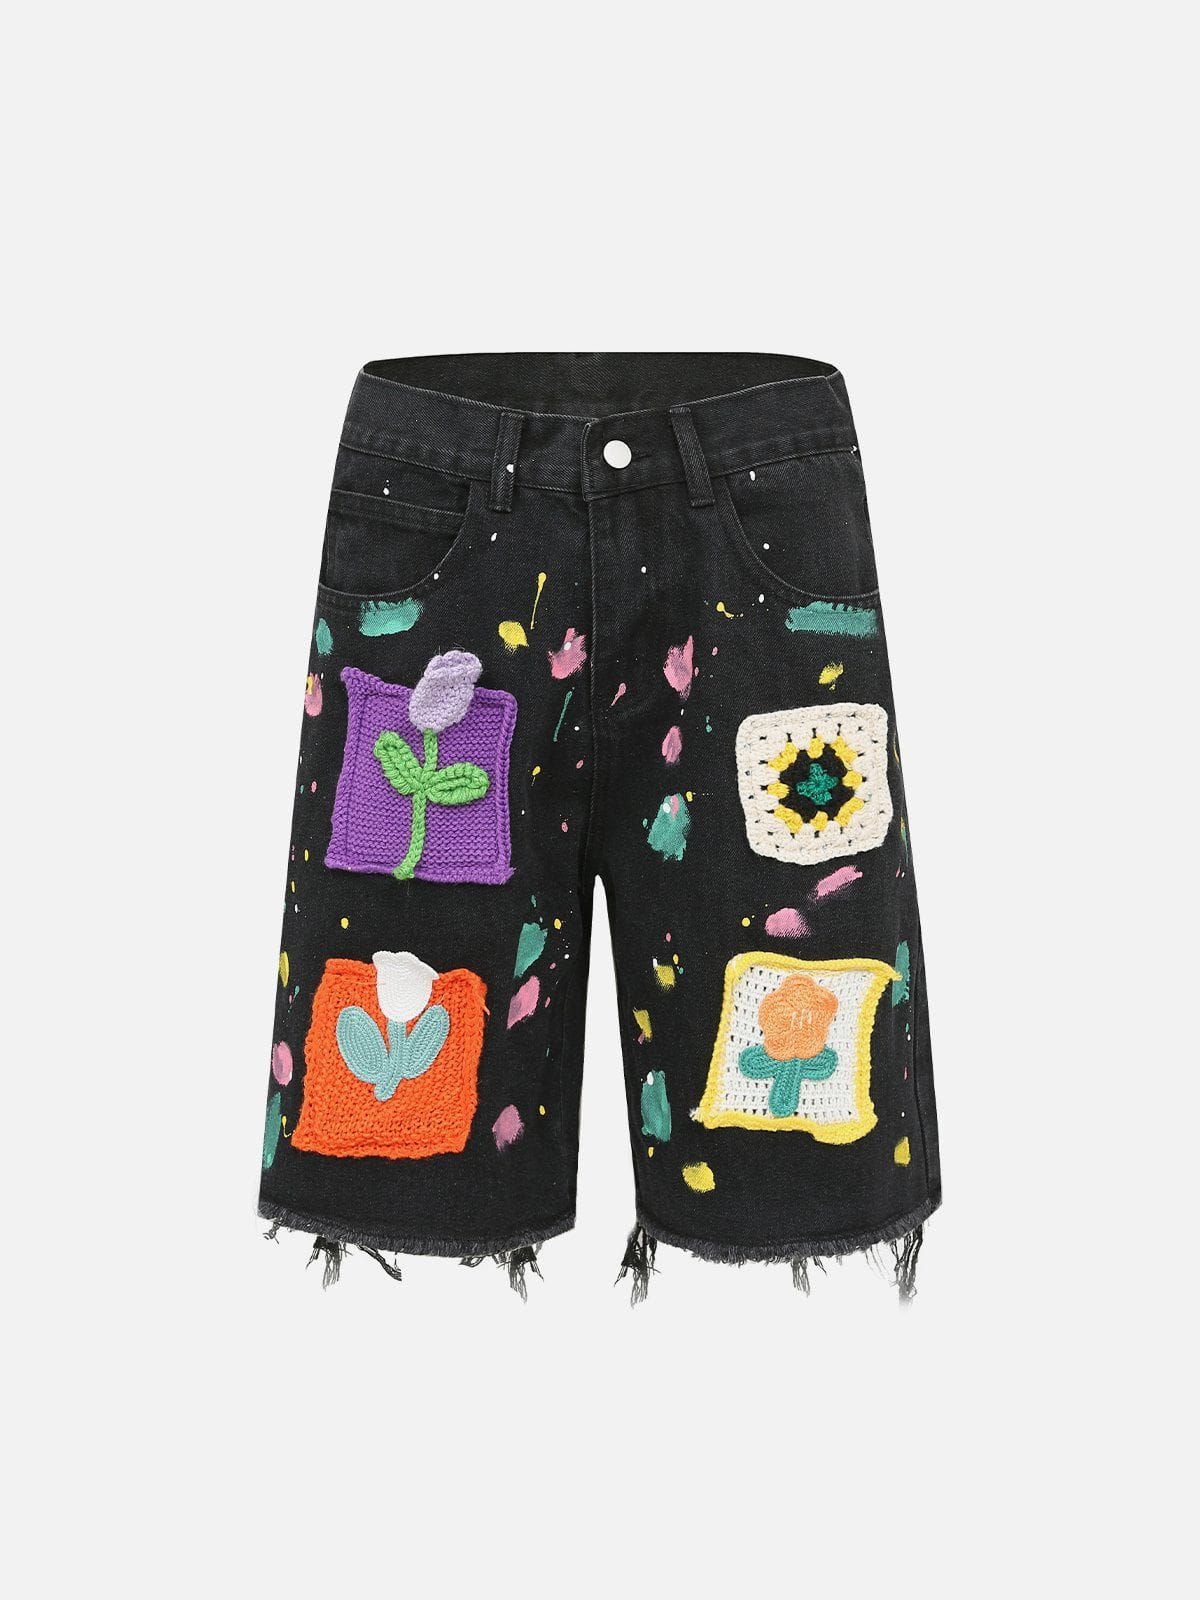 Majesda® - Flowers Patchwork Shorts outfit ideas streetwear fashion